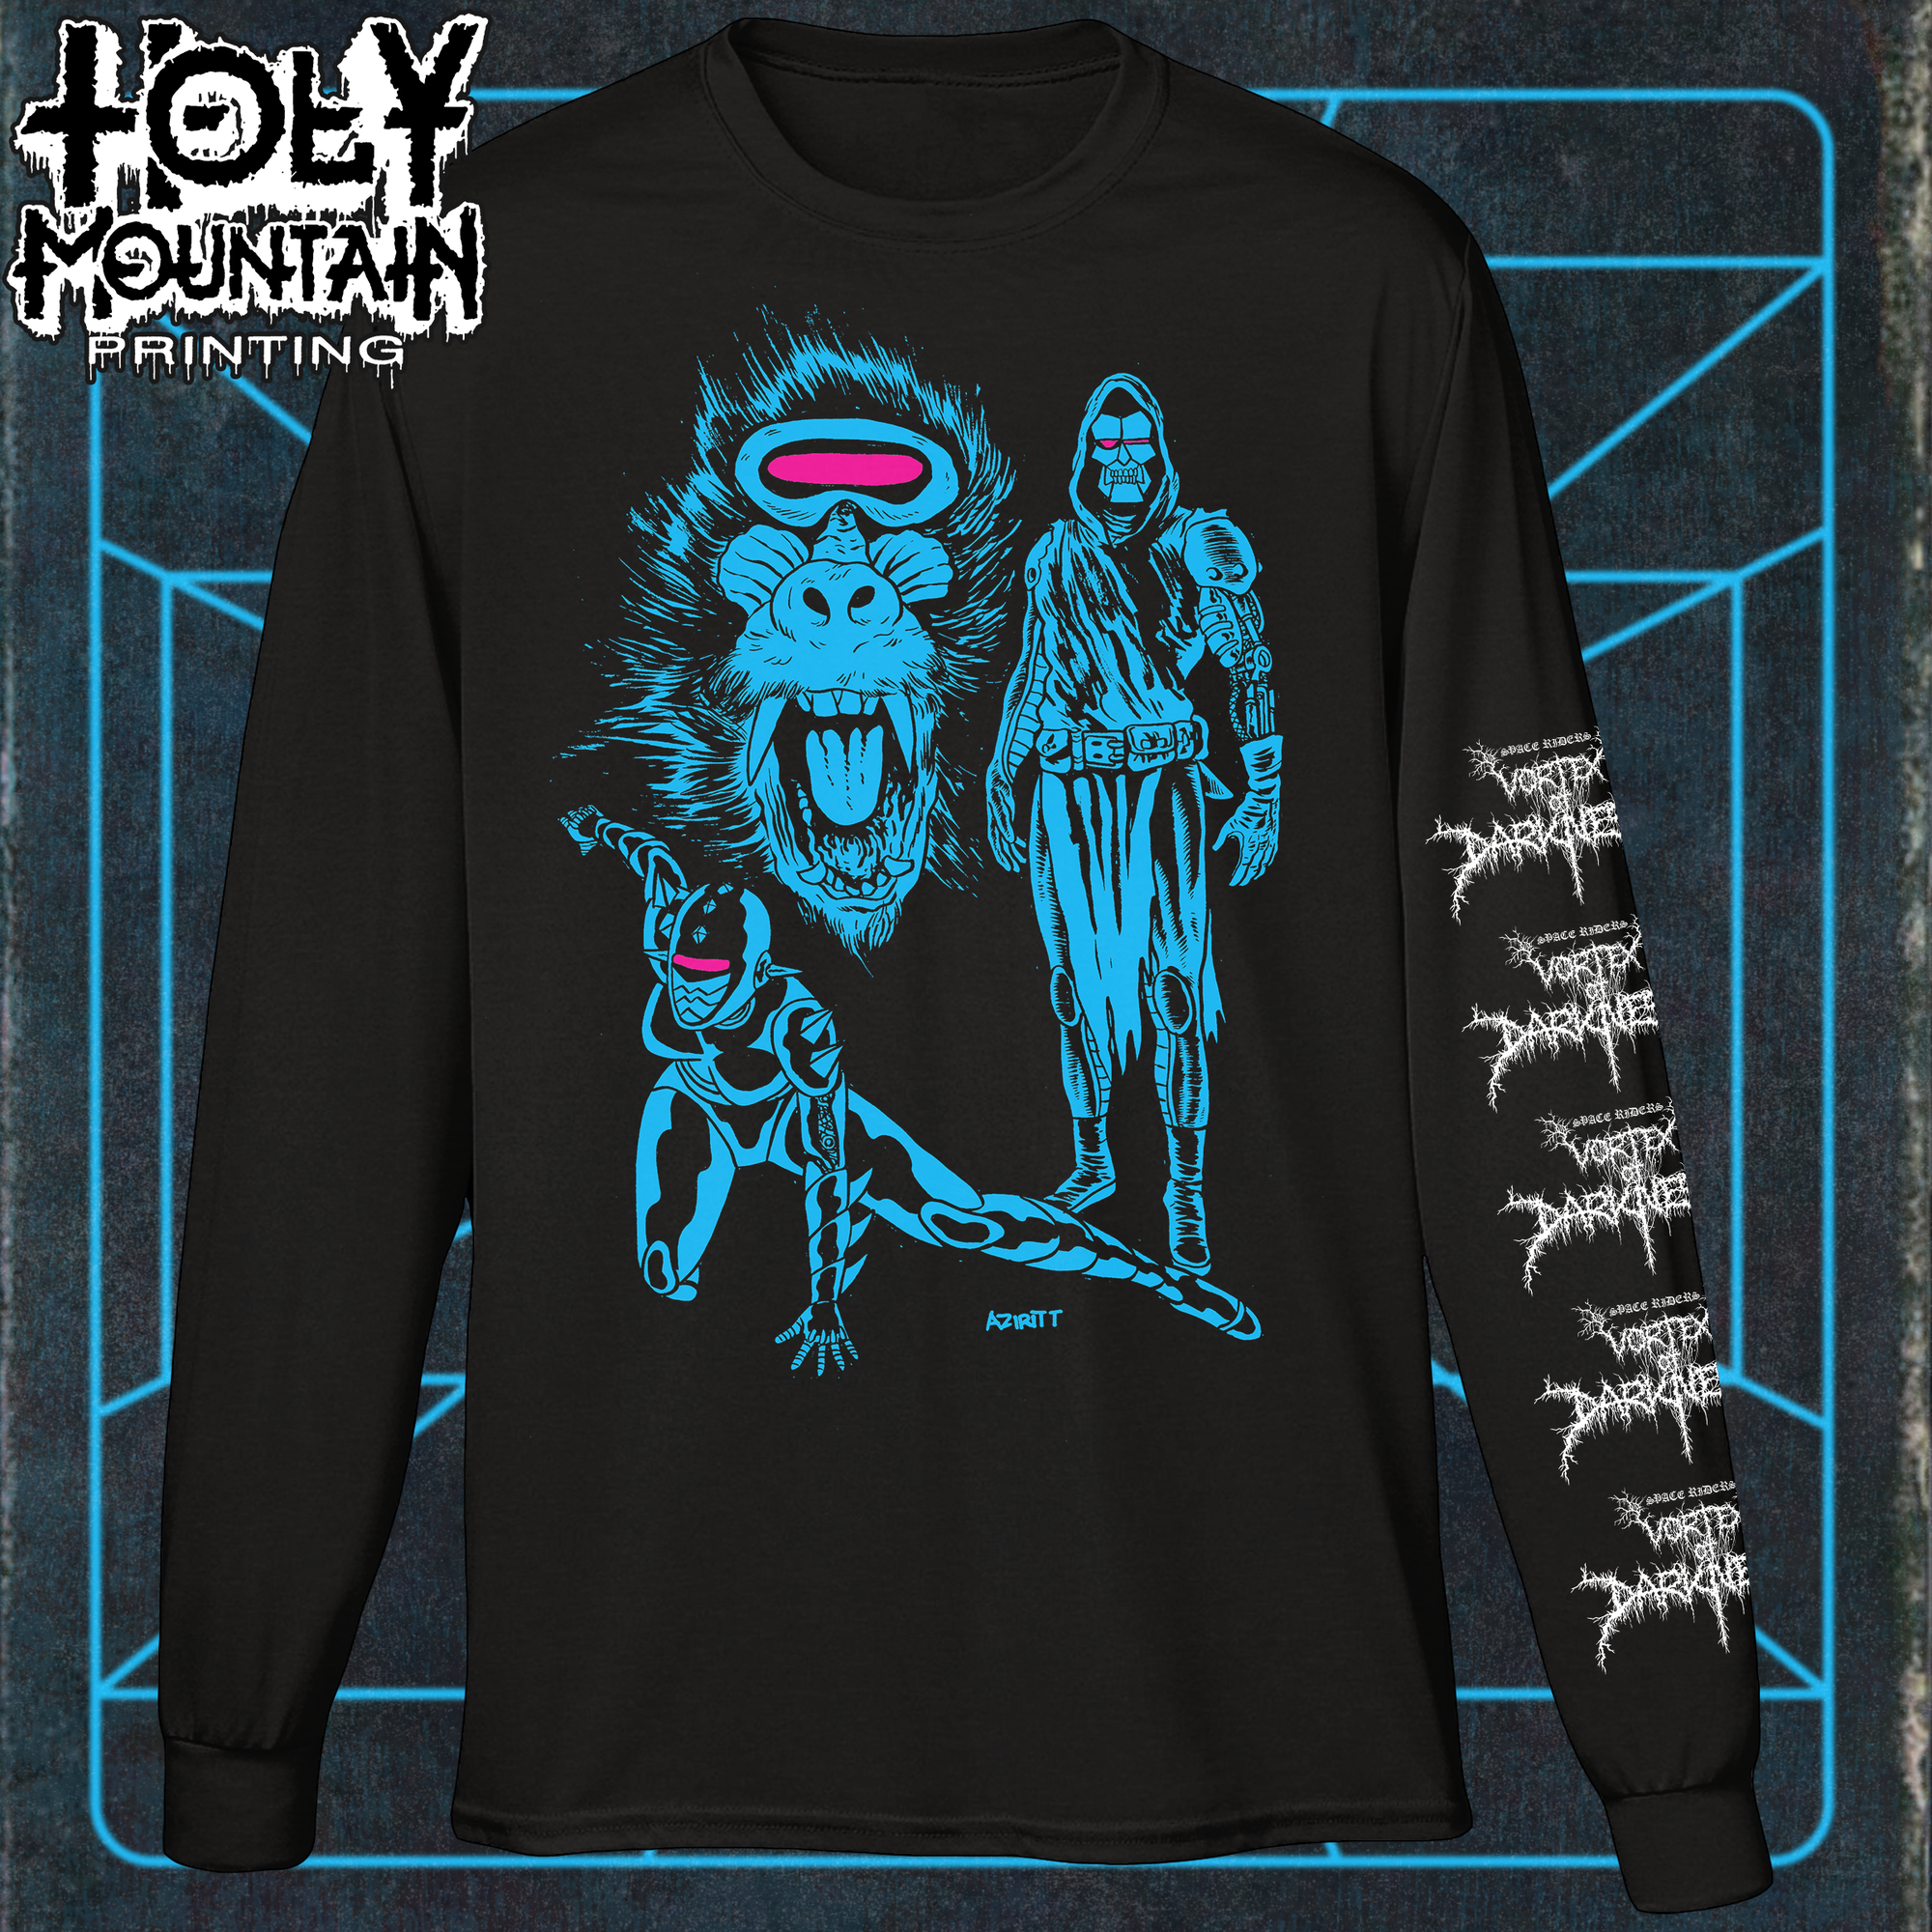 SPACE RIDERS "VORTEX OF DARKNESS" LONG SLEEVE SHIRT